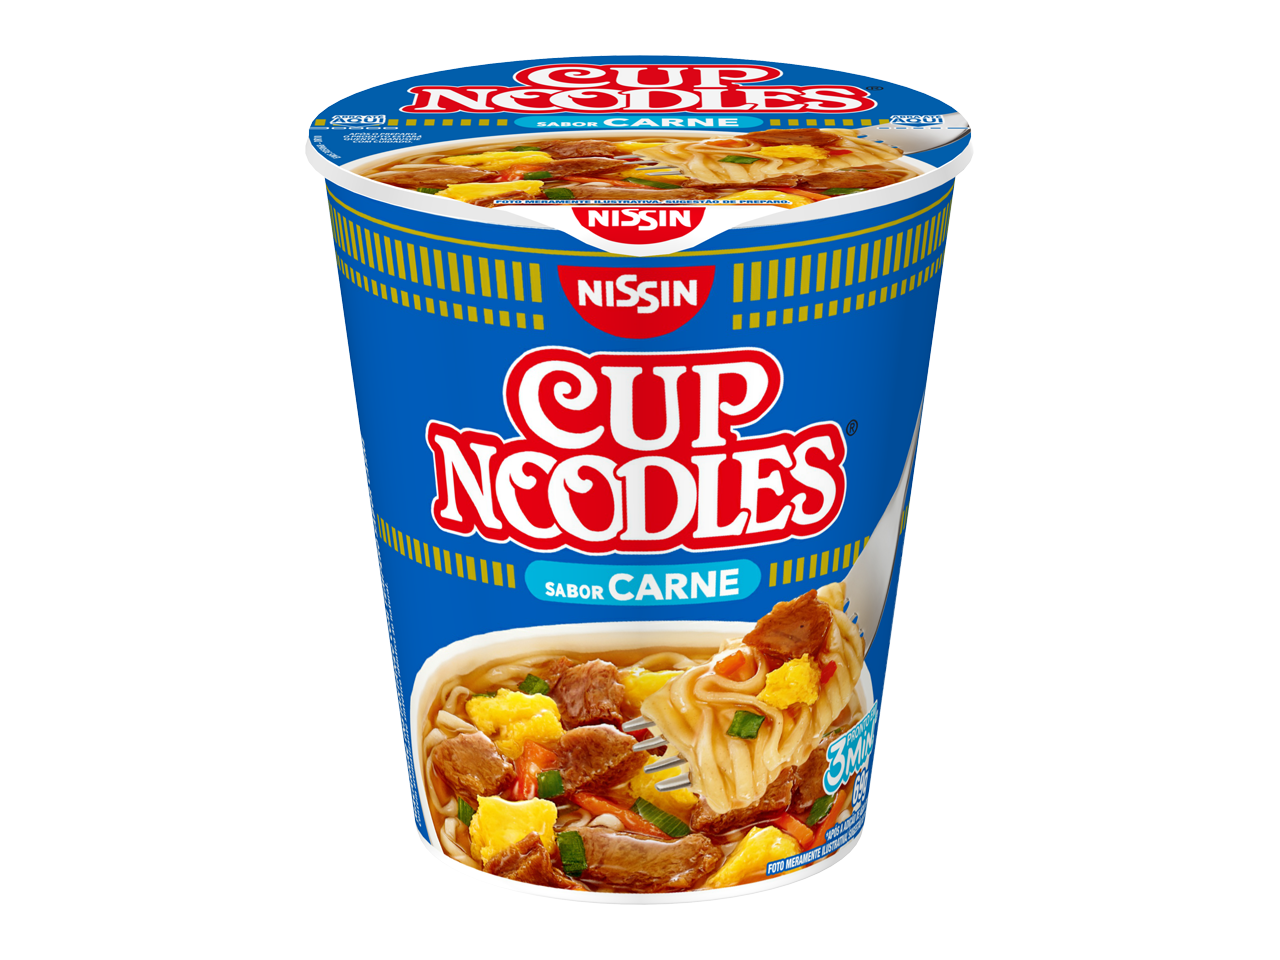 Cup лапша. Лапша Cup Noodle. Nissin foods лапша. Nissin Cup Noodles. Японская лапша Nissin.